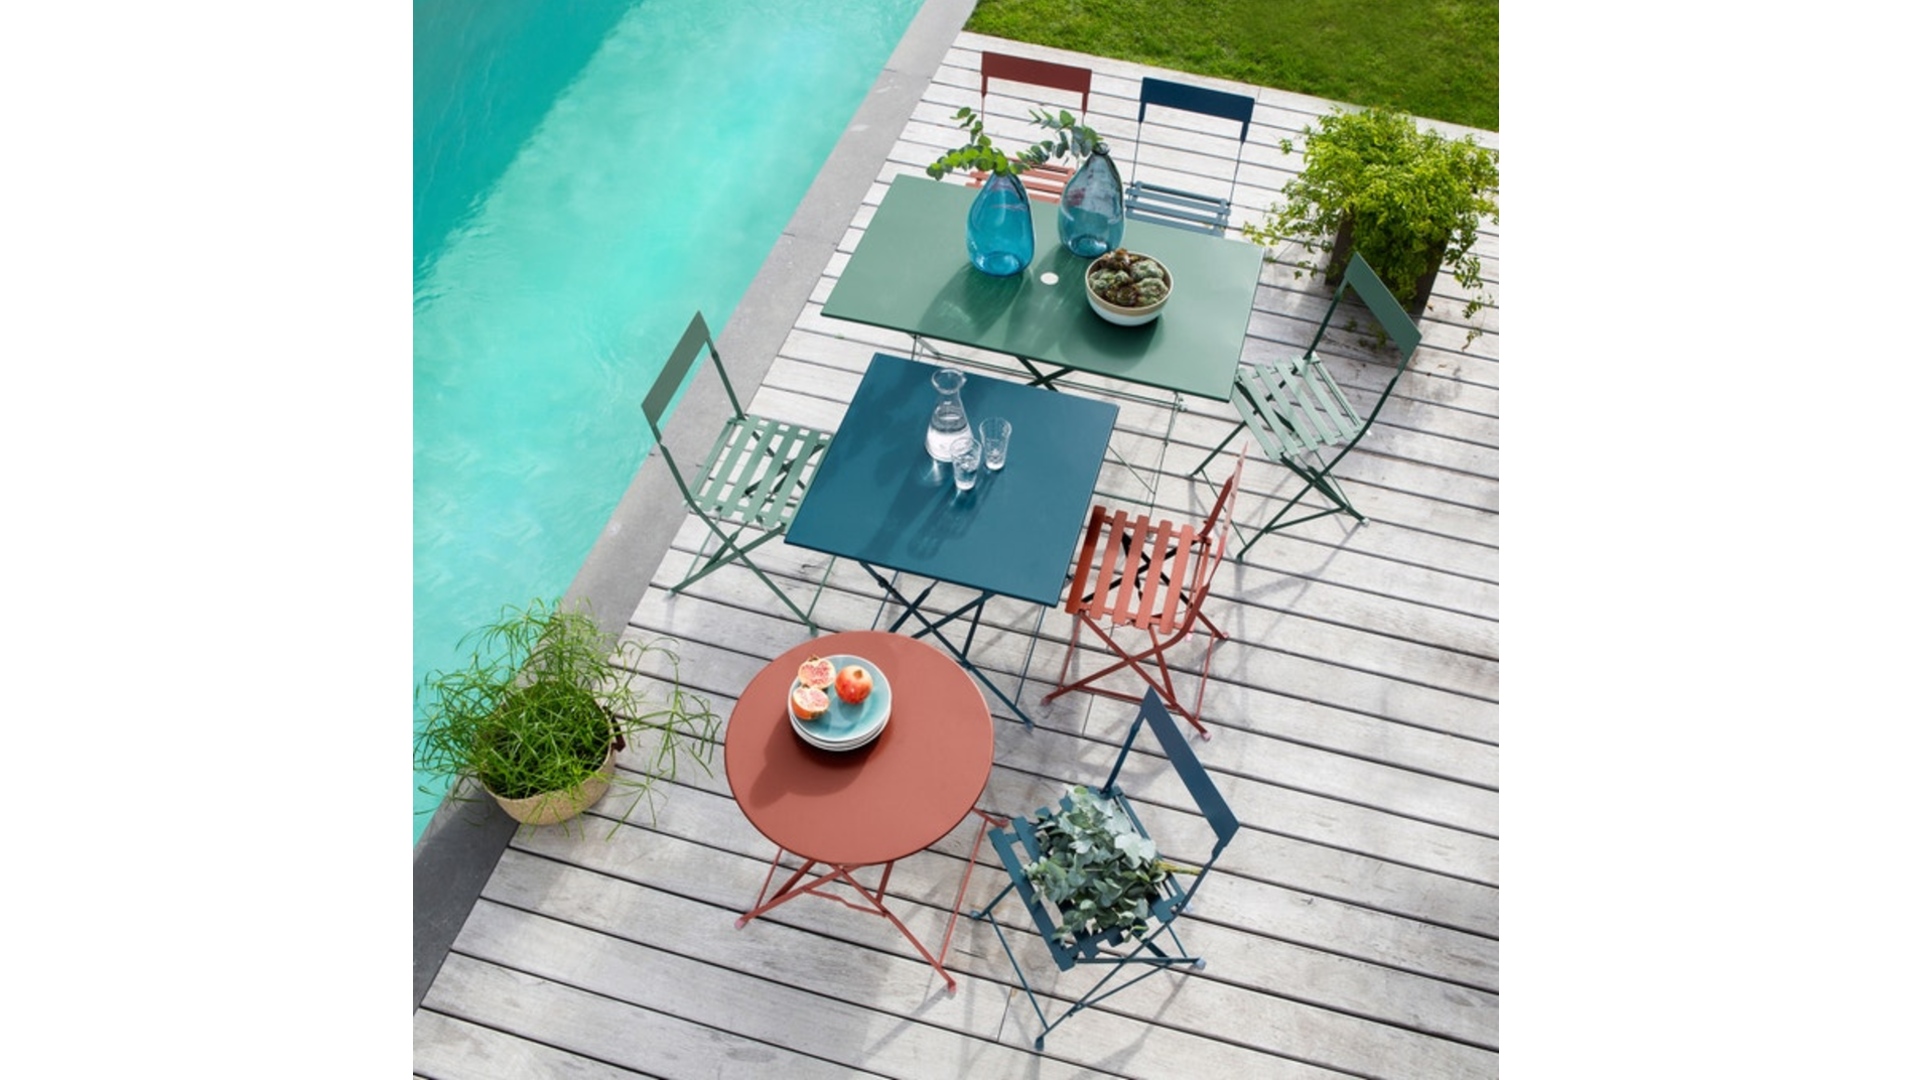 15 best garden chairs 2021: The most stylish outdoor seating | Real Homes